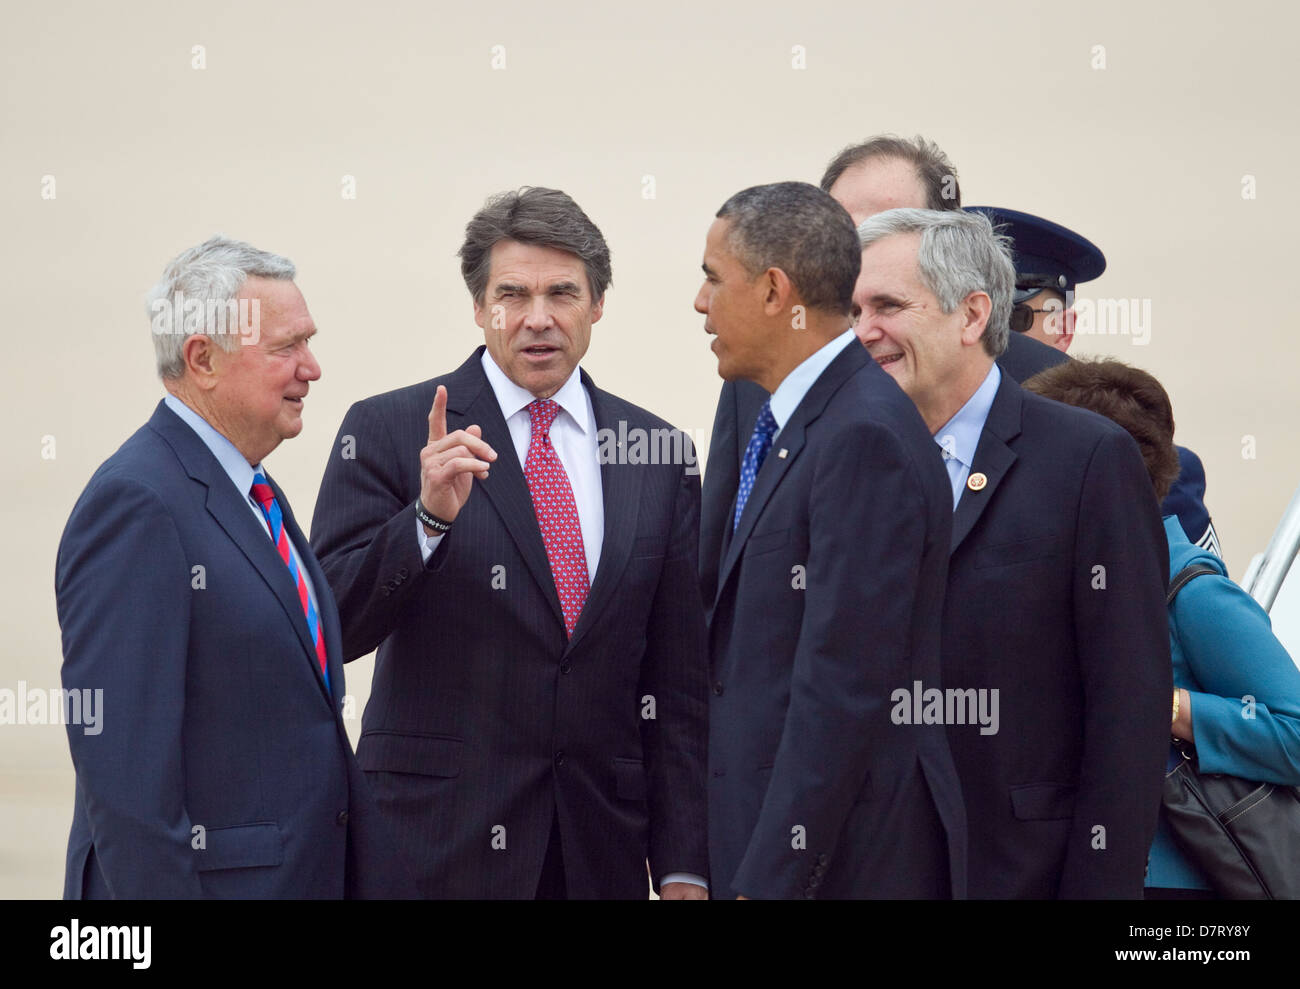 President of the United States, Barack Obama is greeted by various politicians after landing in Austin, Texas Stock Photo